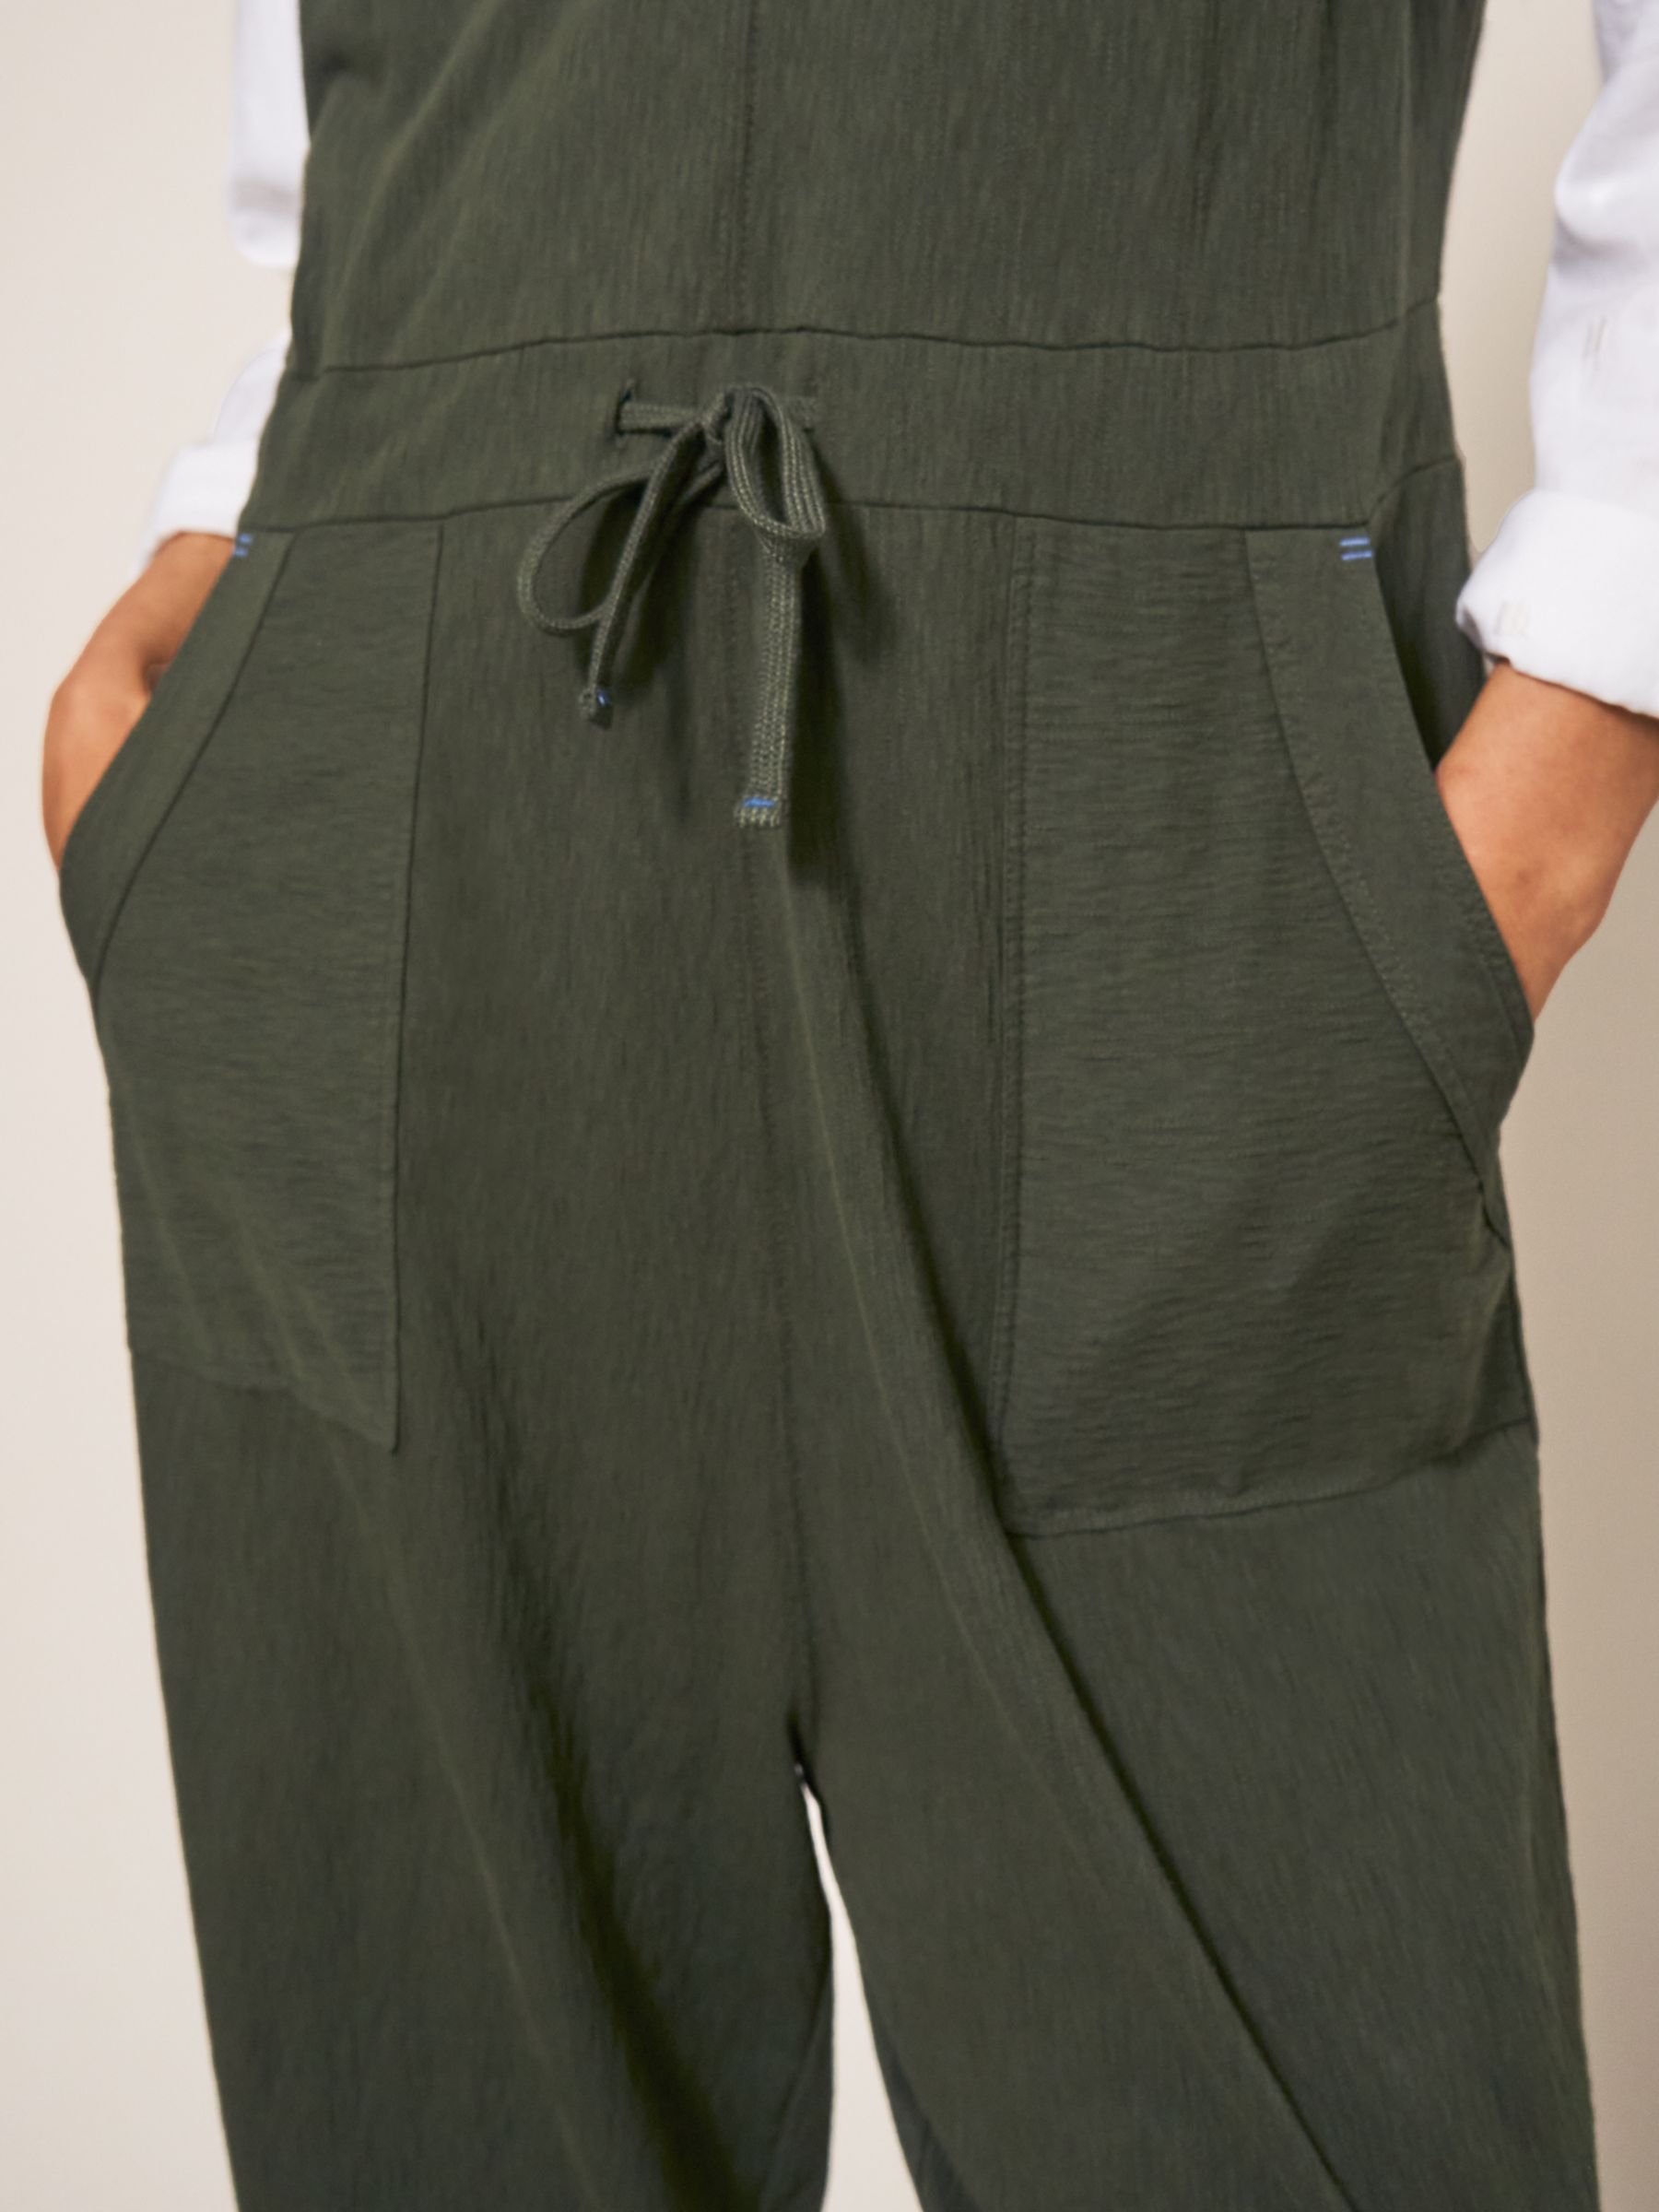 Buy White Stuff Viola Linen Dungarees from the Next UK online shop